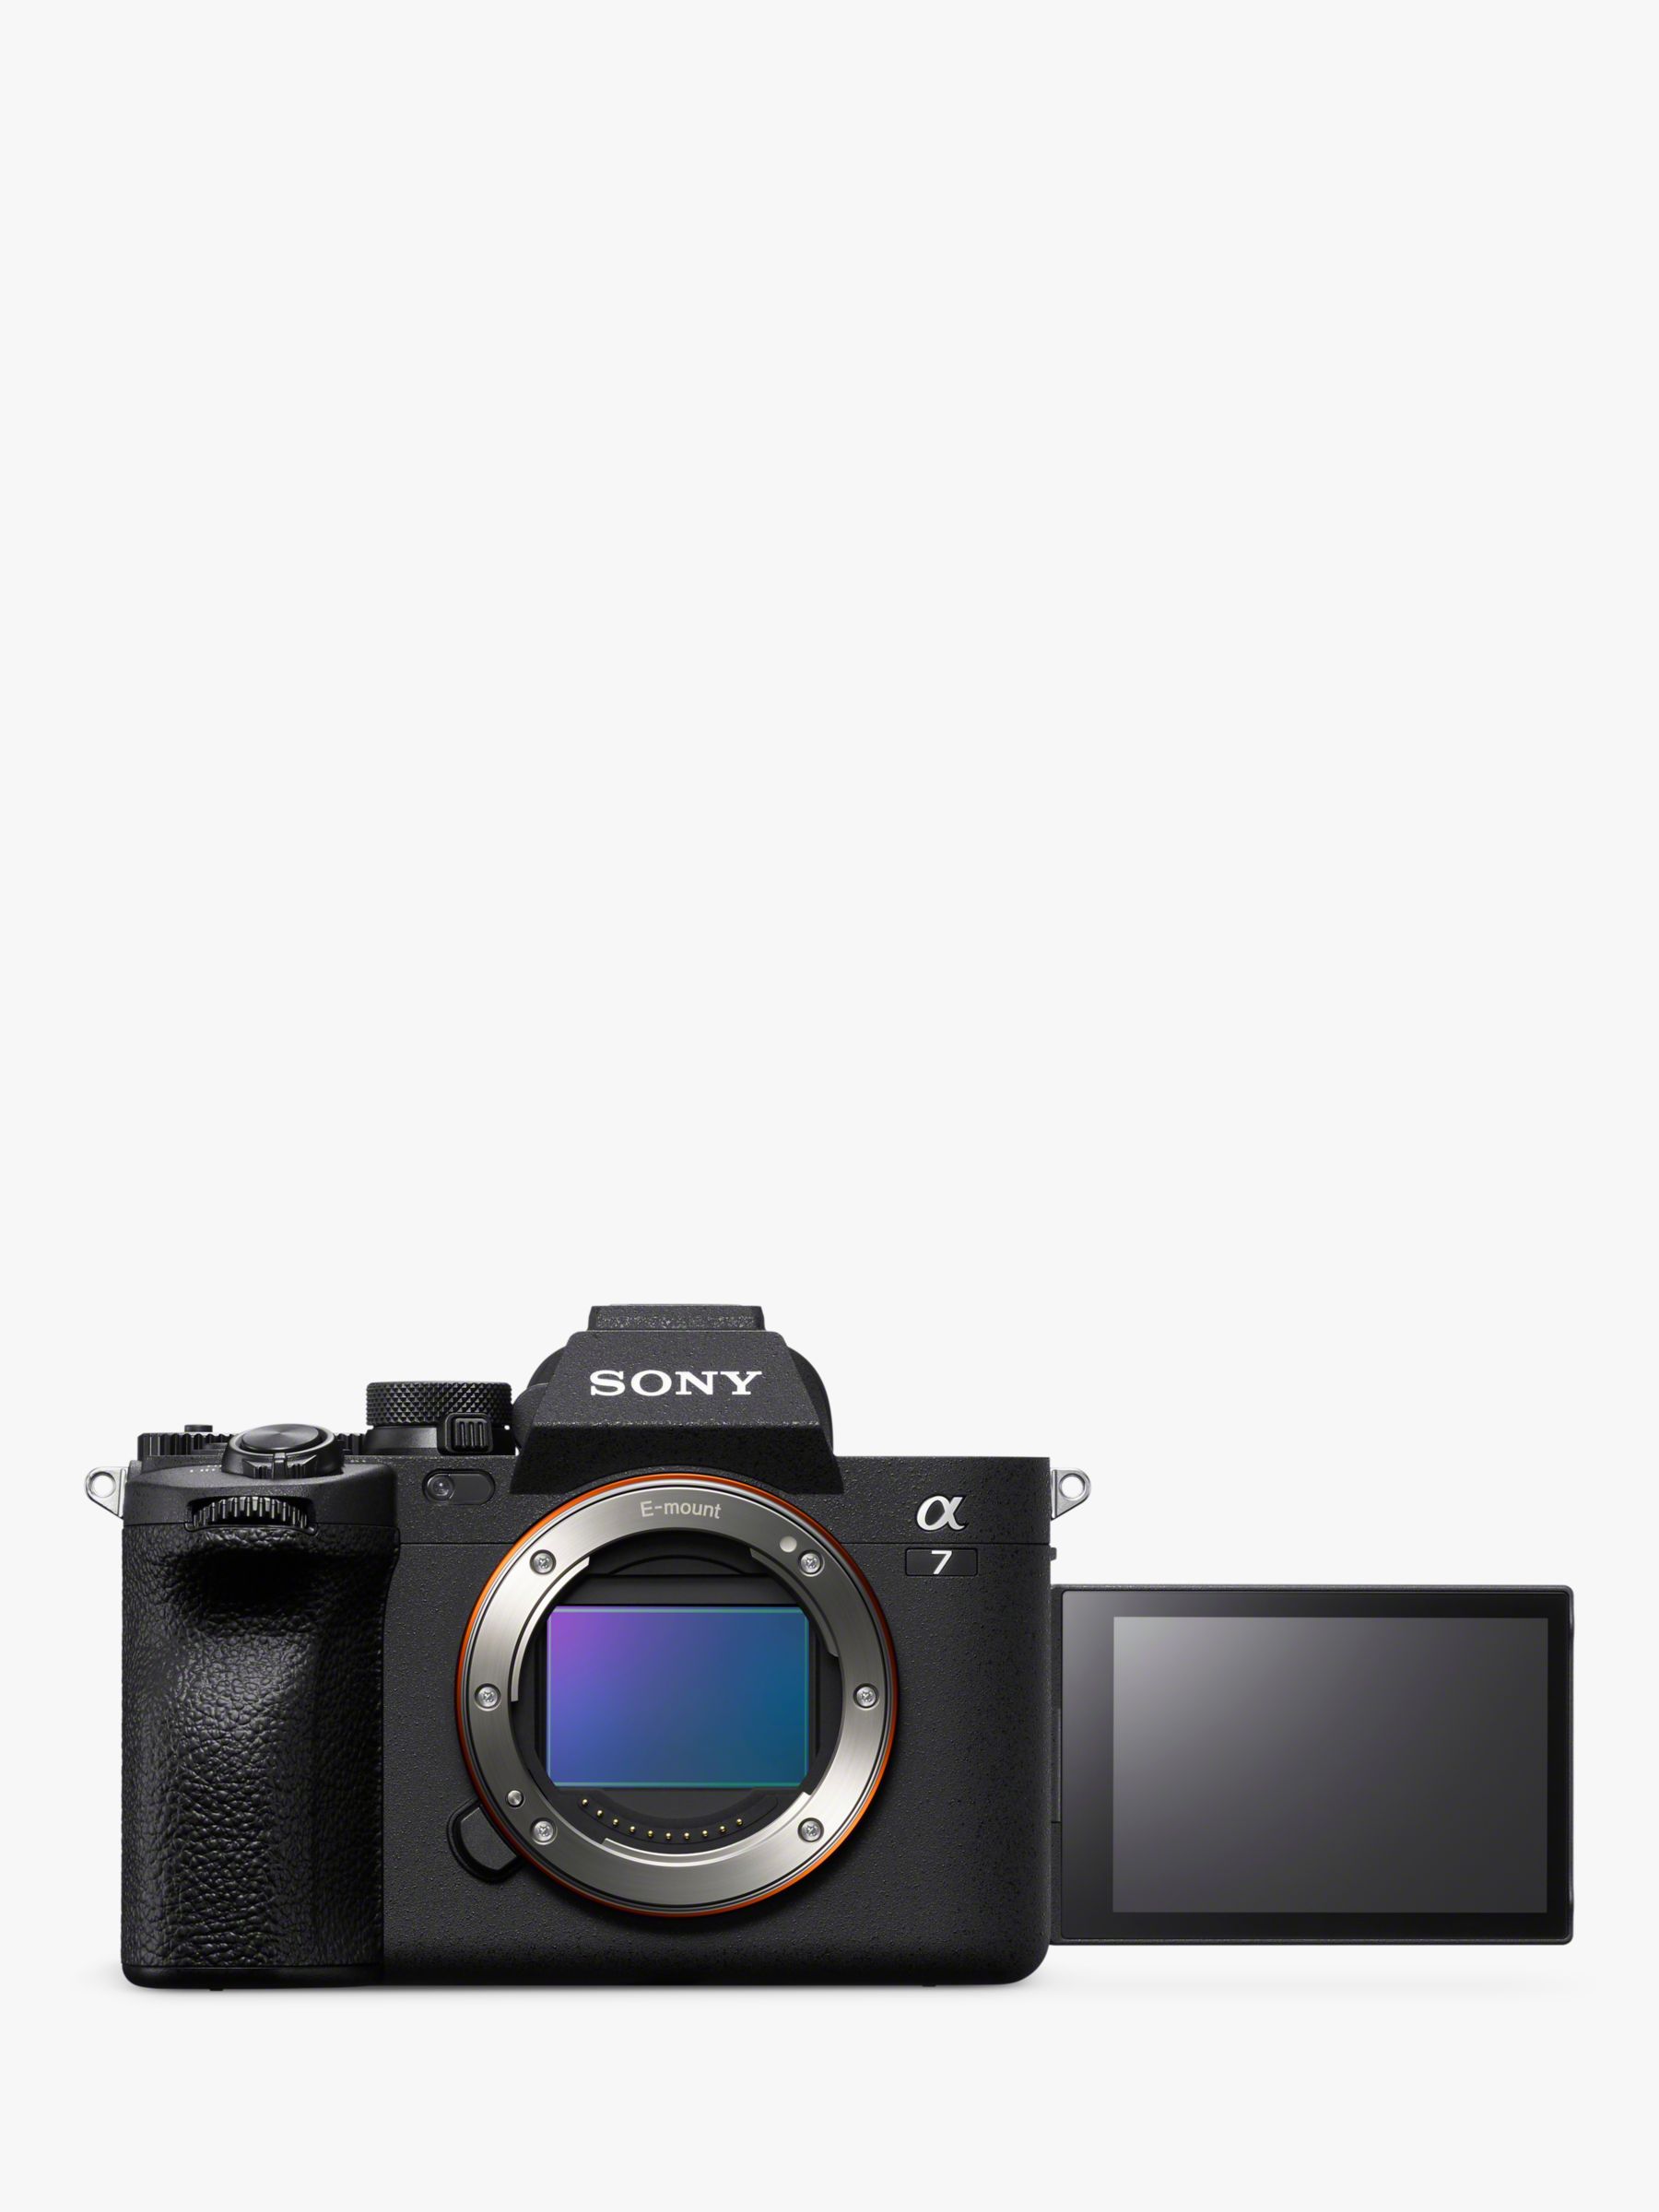 Buy Digital Mirrorless Camera Sony a6700 with 18-135mm Lens ILCE